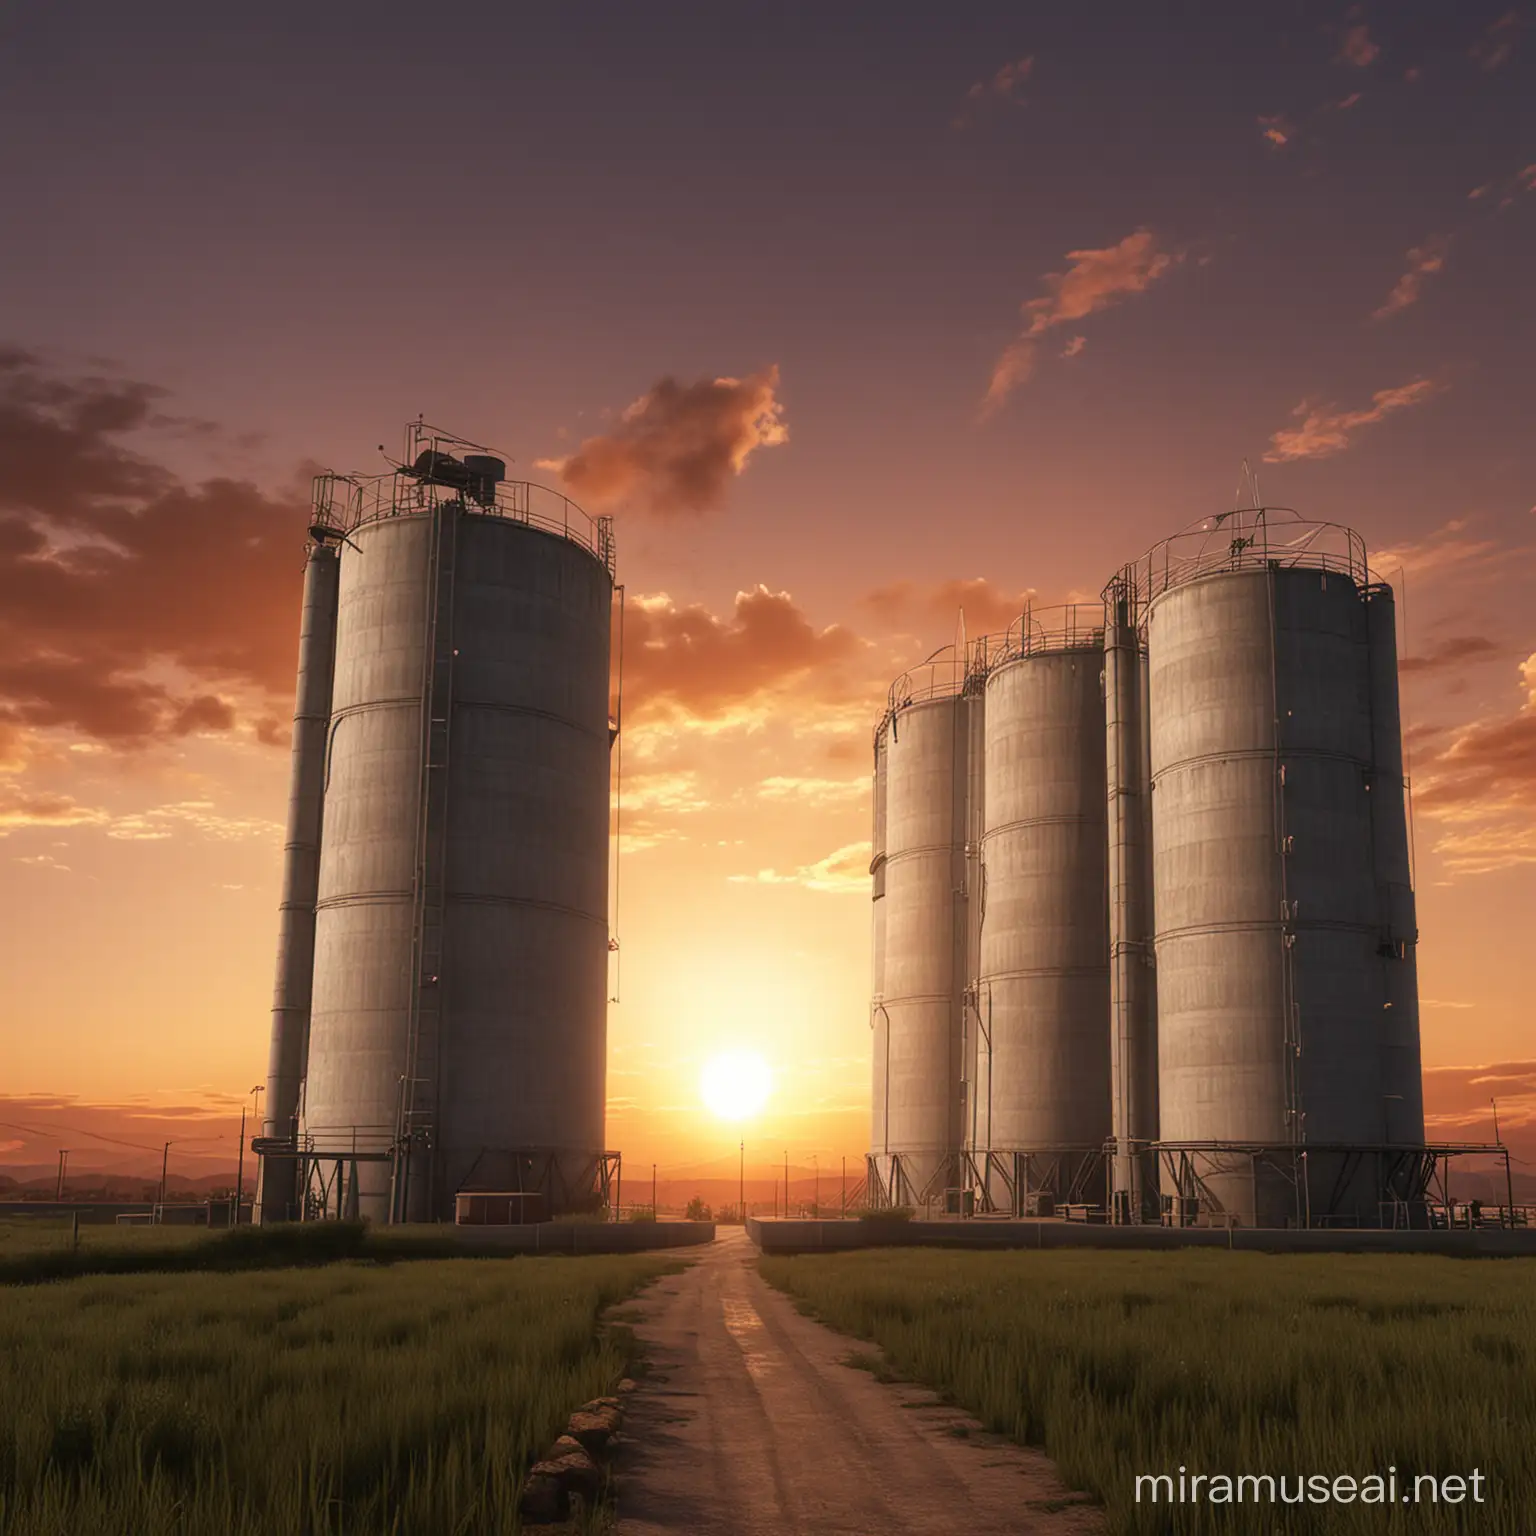 Sunset Ambience at Remote ICBM Silos Realistic HD Image